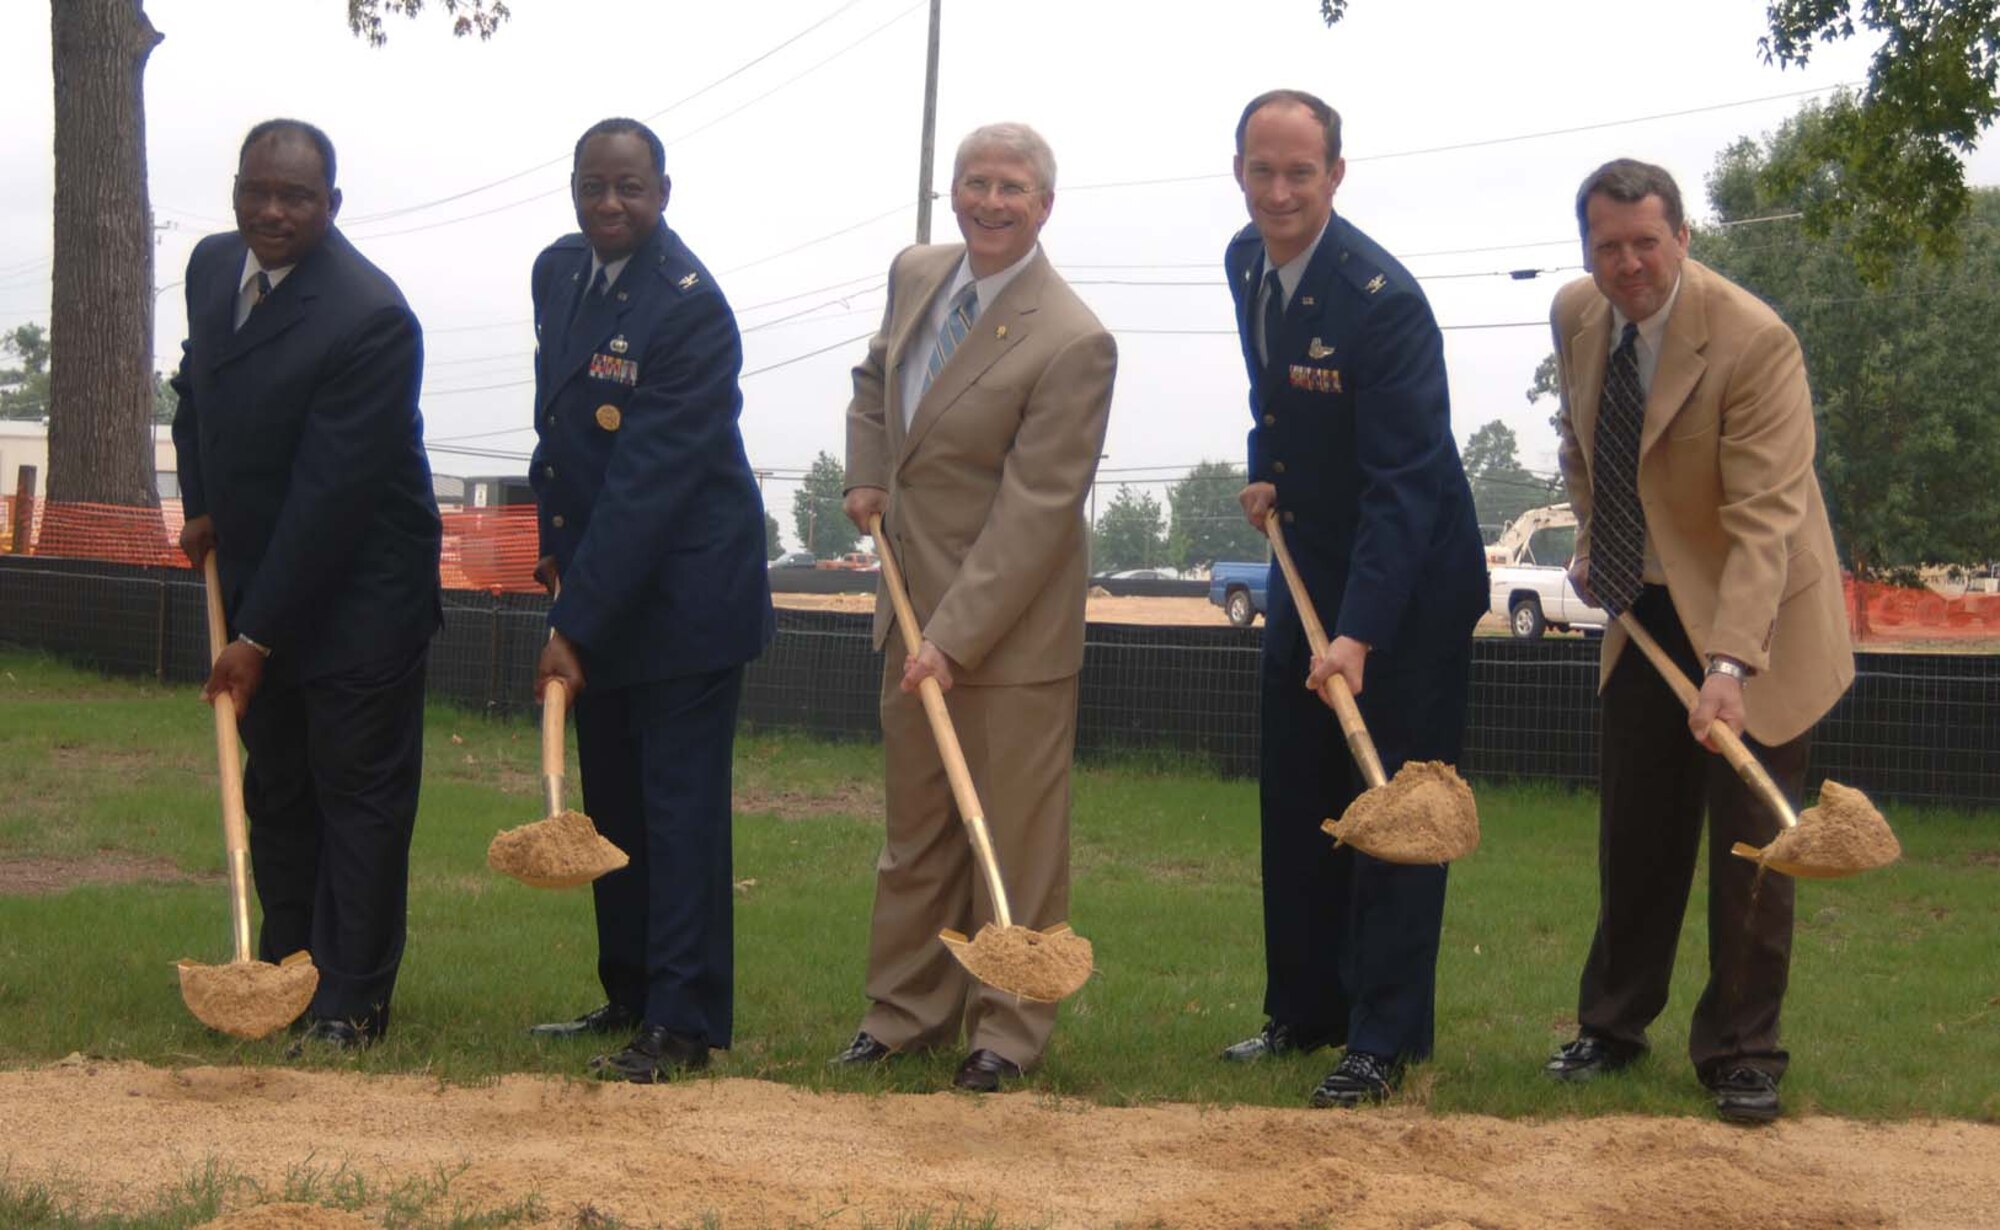 Colonel Dave Gerber, 14th Flying Training Wing commander, shovels dirt at the 14th Mission Support Group Complex. He is accompanied by, from left to right, the Honorable Robert Smith, Mayor of the City of Columbus, Col. Mark Brown, 14th Mission Support Group commander, Mississippi Congressman Roger Wicker and Steve Arendale, U.S. Army Corp of Engineers. Each scooped a load of dirt with their golden shovels to commemorate the event. (U.S. Air Force Photo by Airman 1st Class Danielle Powell)